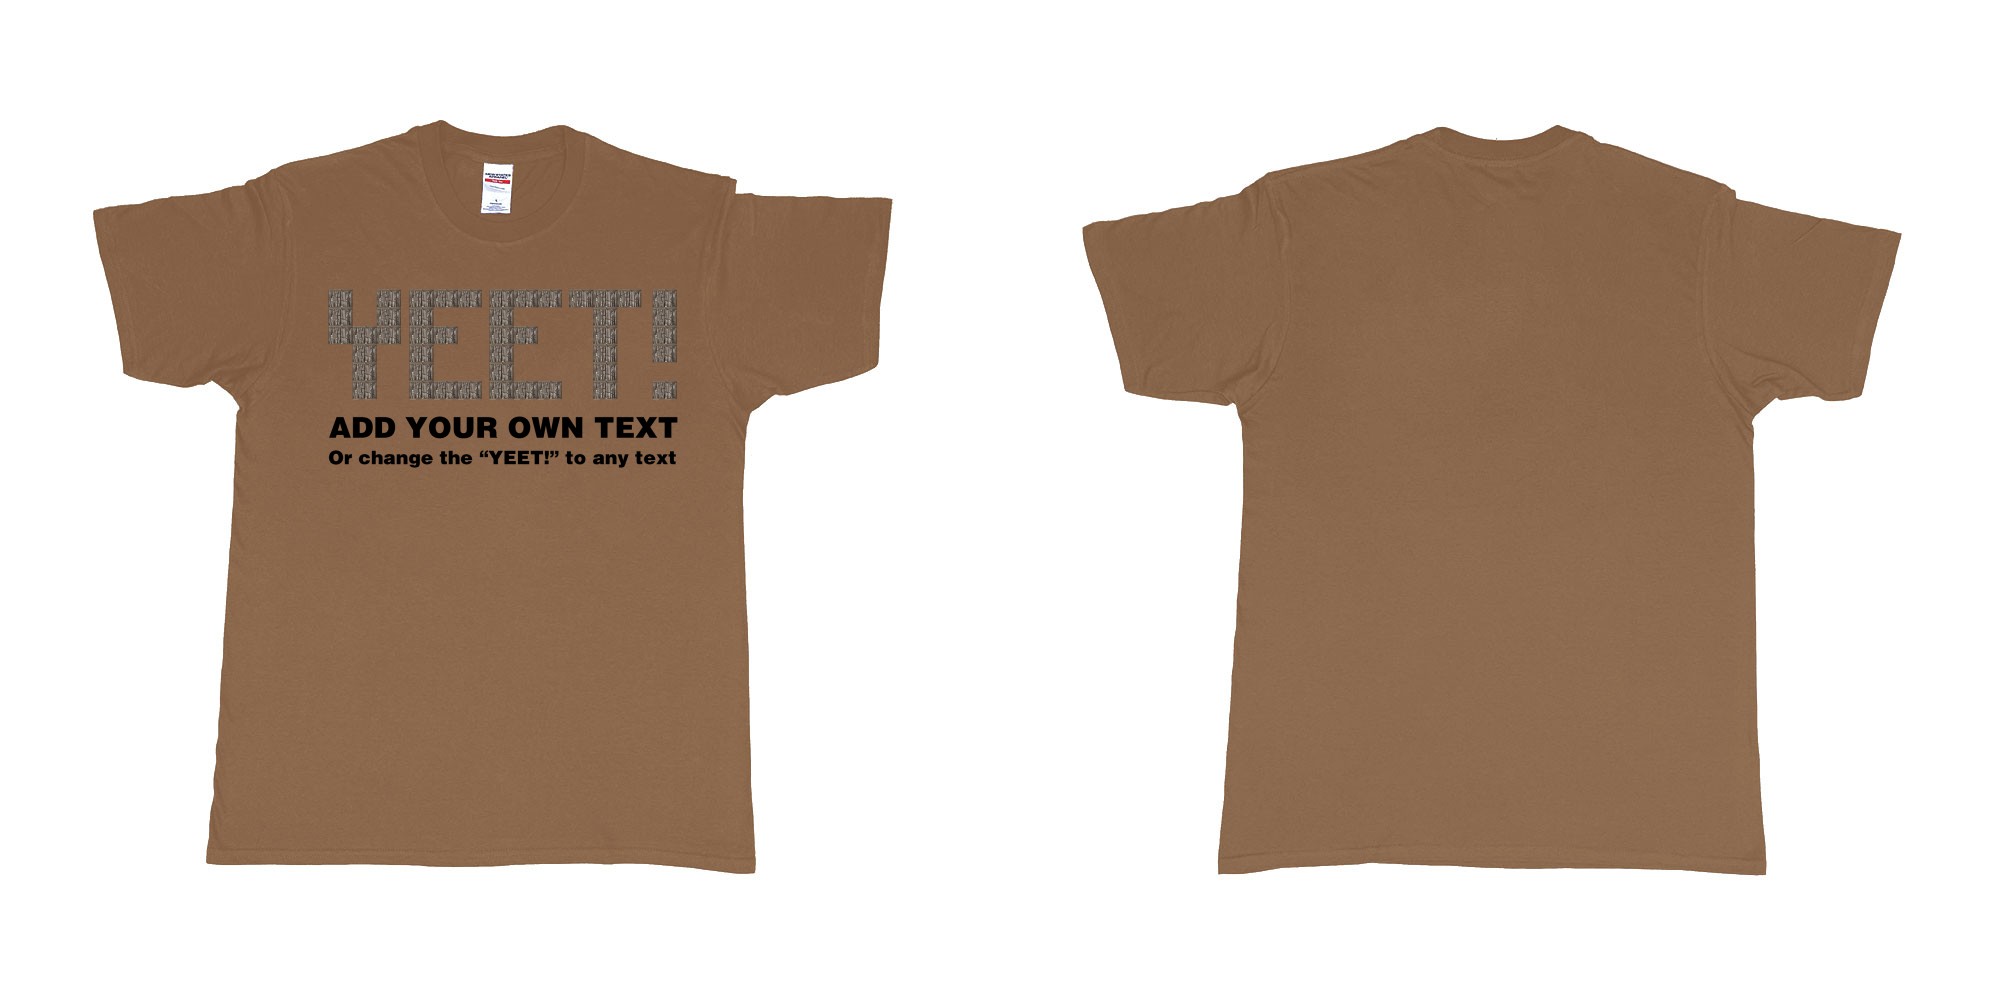 Custom tshirt design fortnite wood wall custom text yeet design in fabric color chestnut choice your own text made in Bali by The Pirate Way